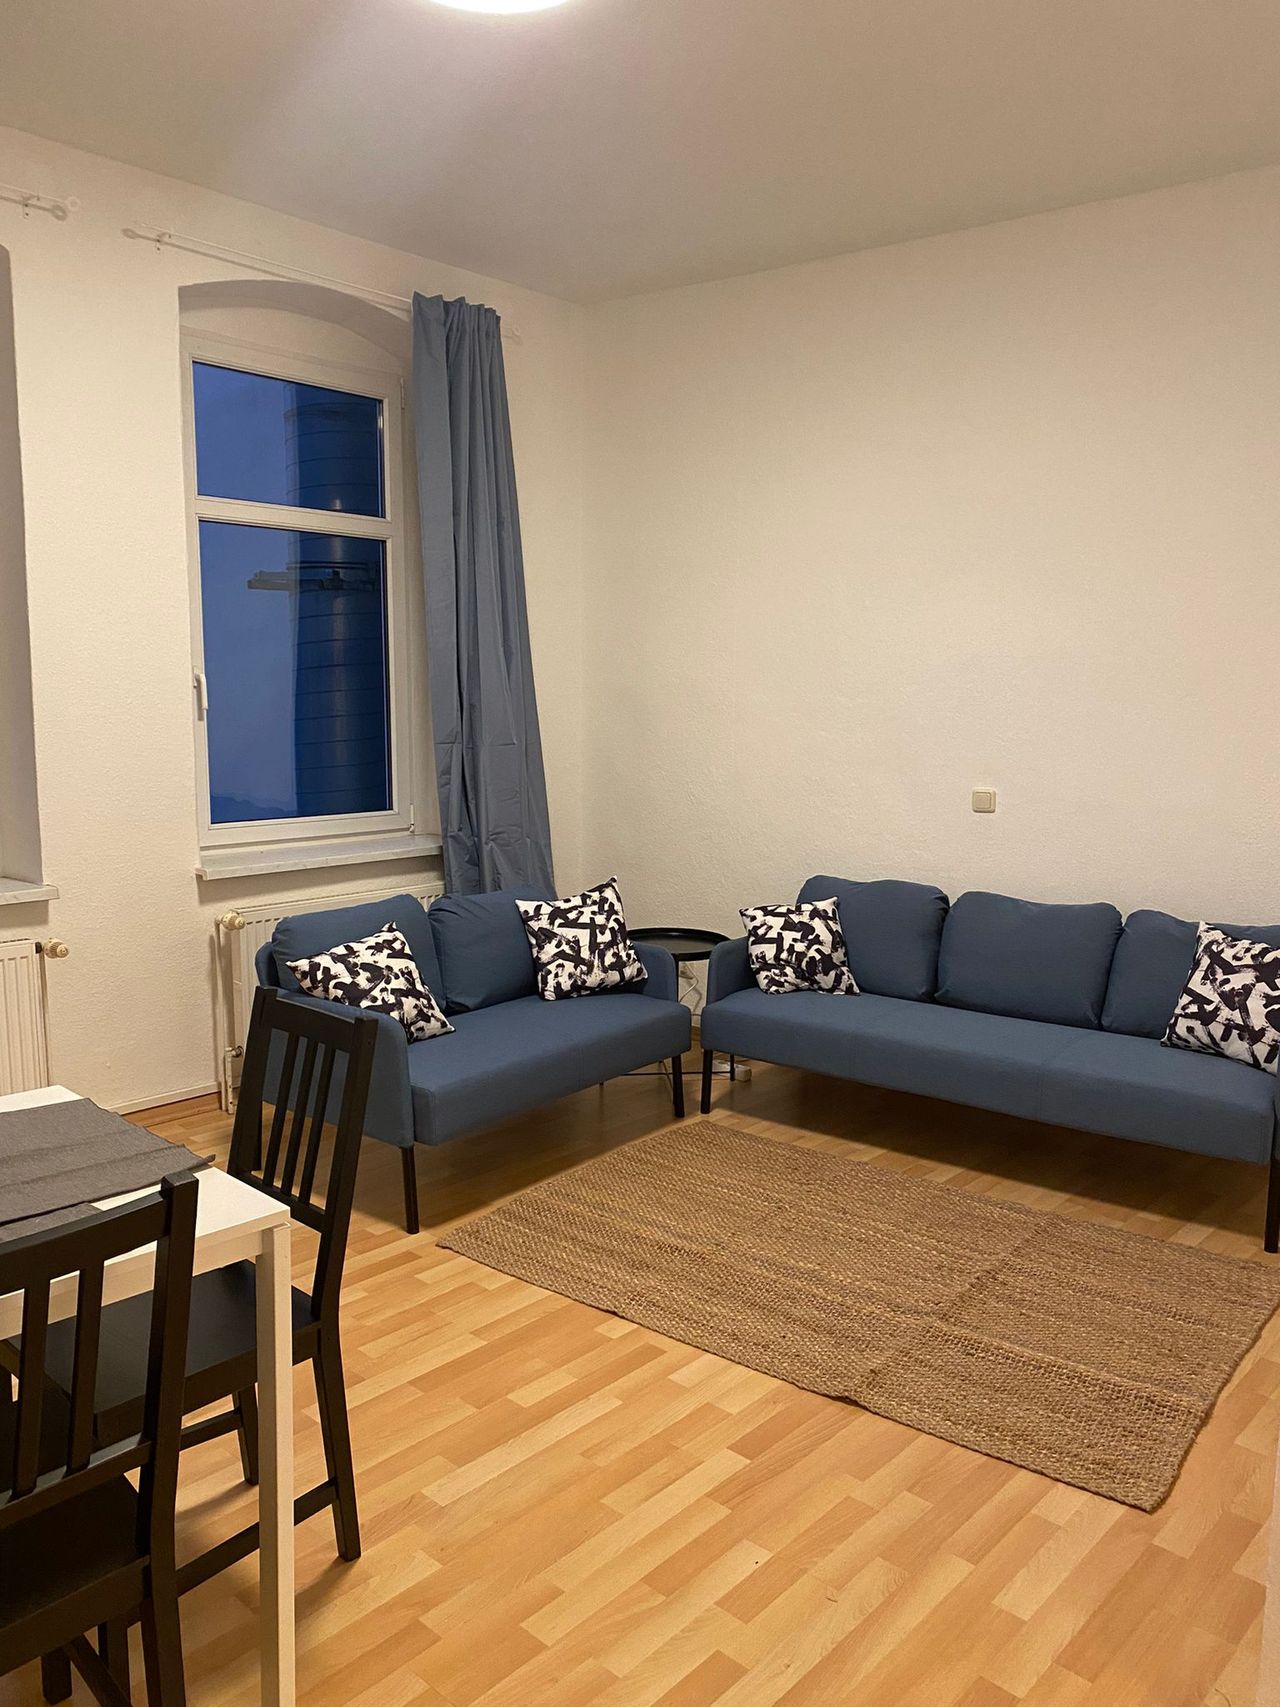 Stylish Furnished Apartment in Magdeburg – Ideal for Families, Groups, and Workers